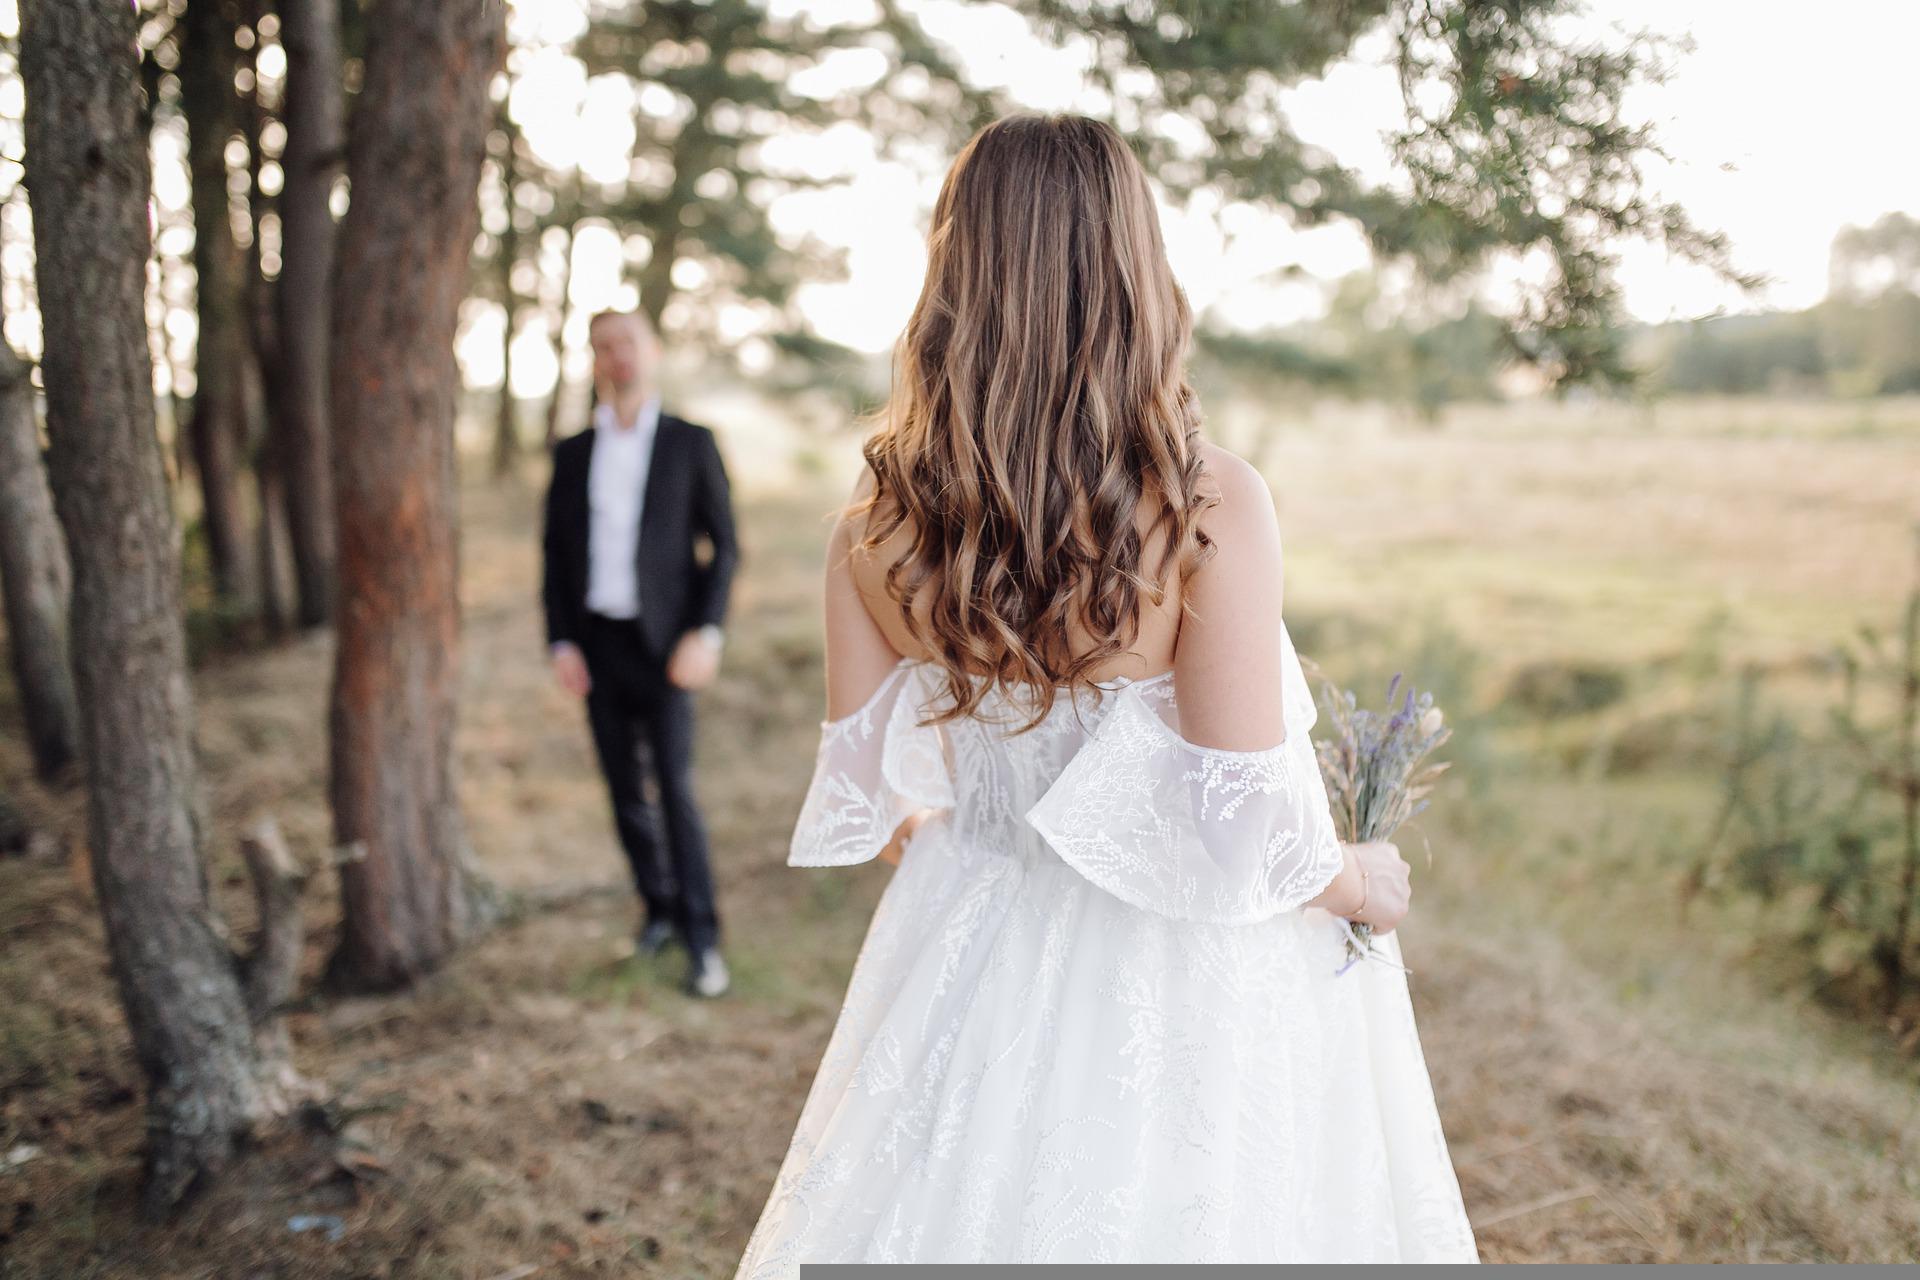 Recently married bride wearing her wedding dress with groom in background